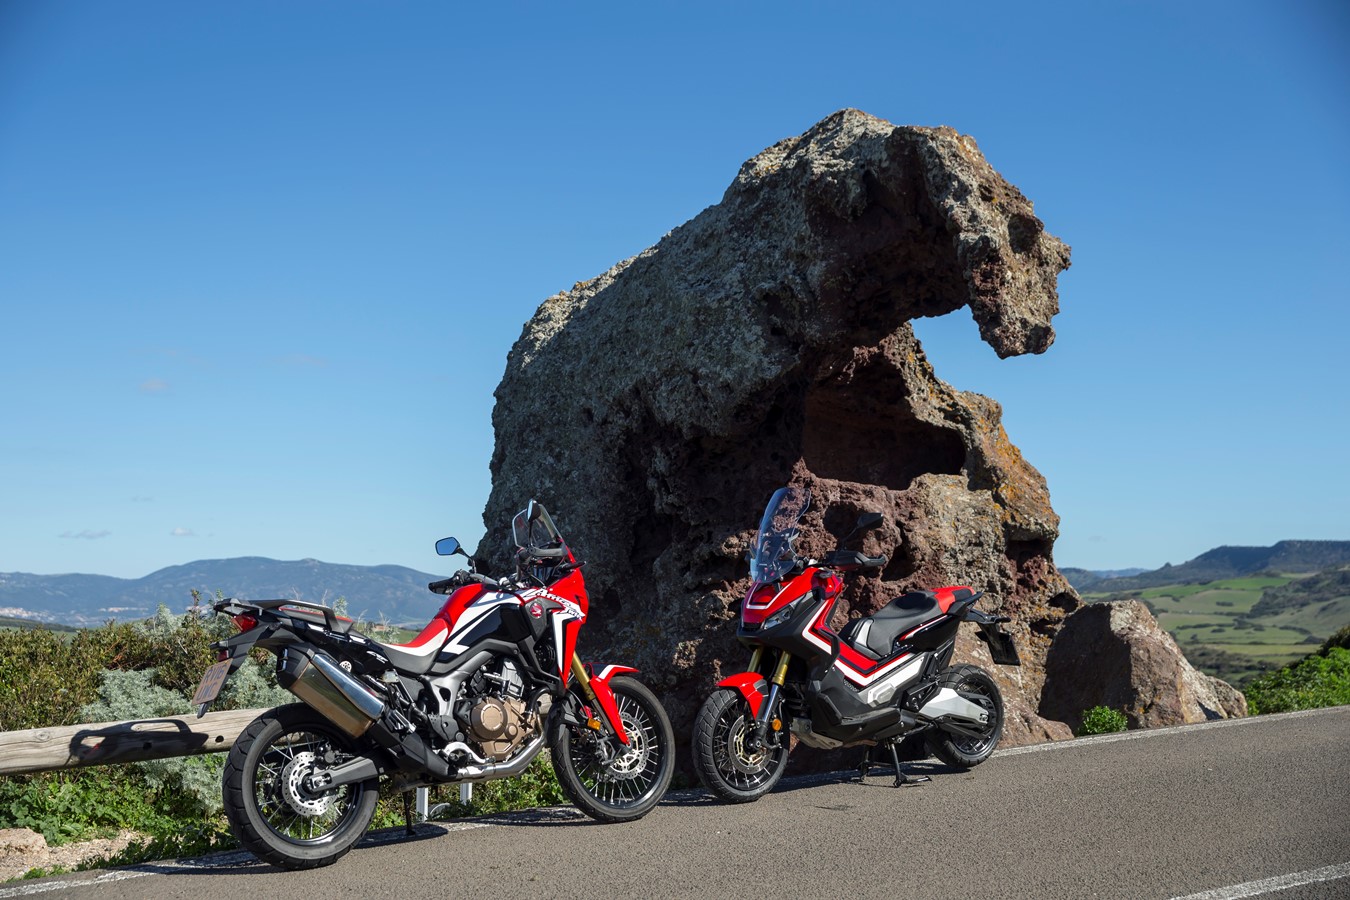 17YM X-ADV and 16YM Africa Twin